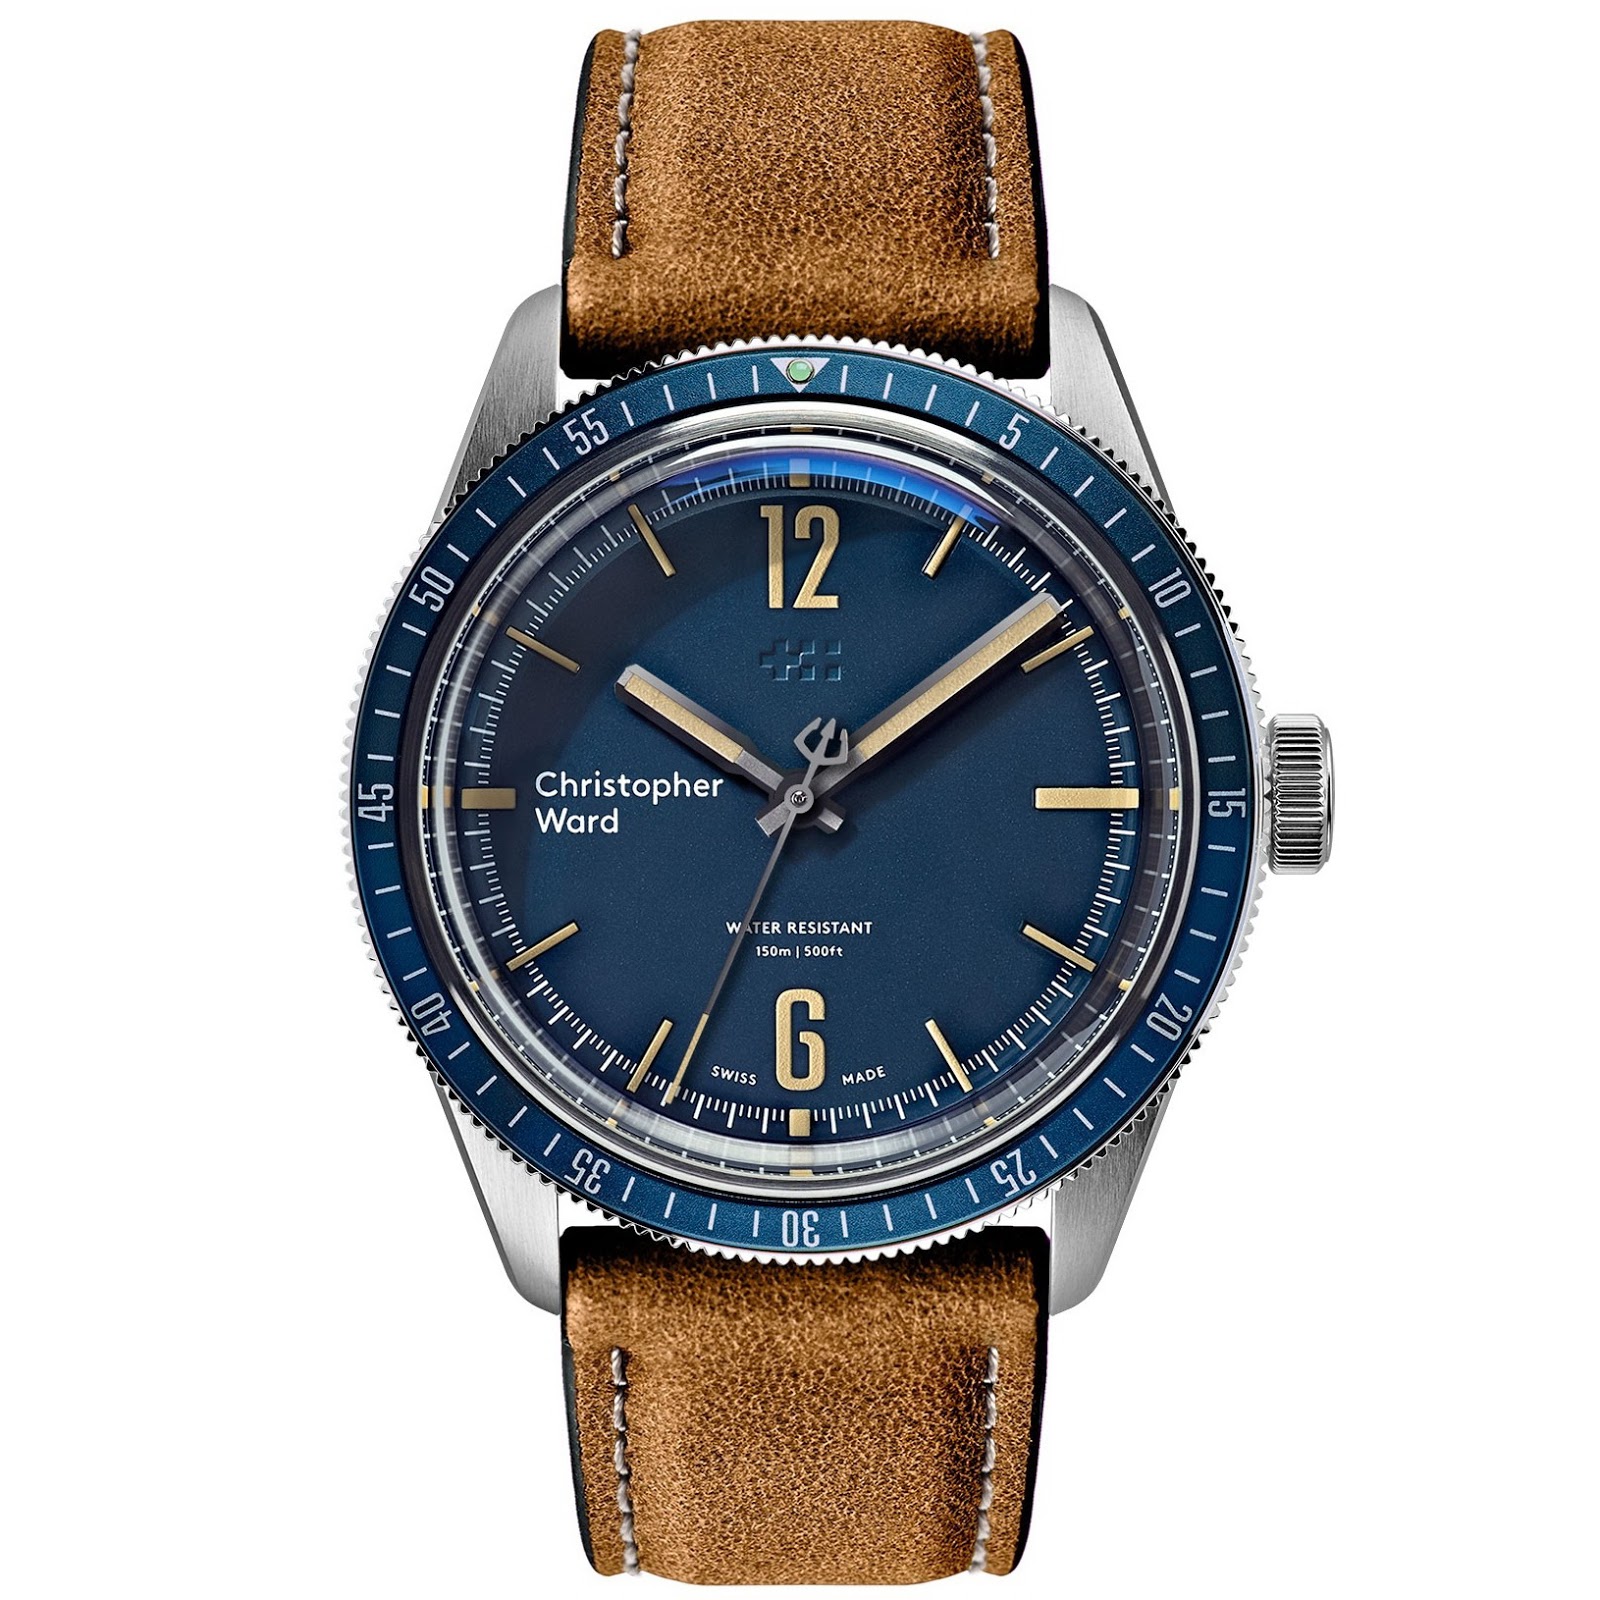 Christopher Ward's new C65 Trident Diver CHRISTOPHER%2BWARD%2BC65%2BTrident%2BDIVER%2B02